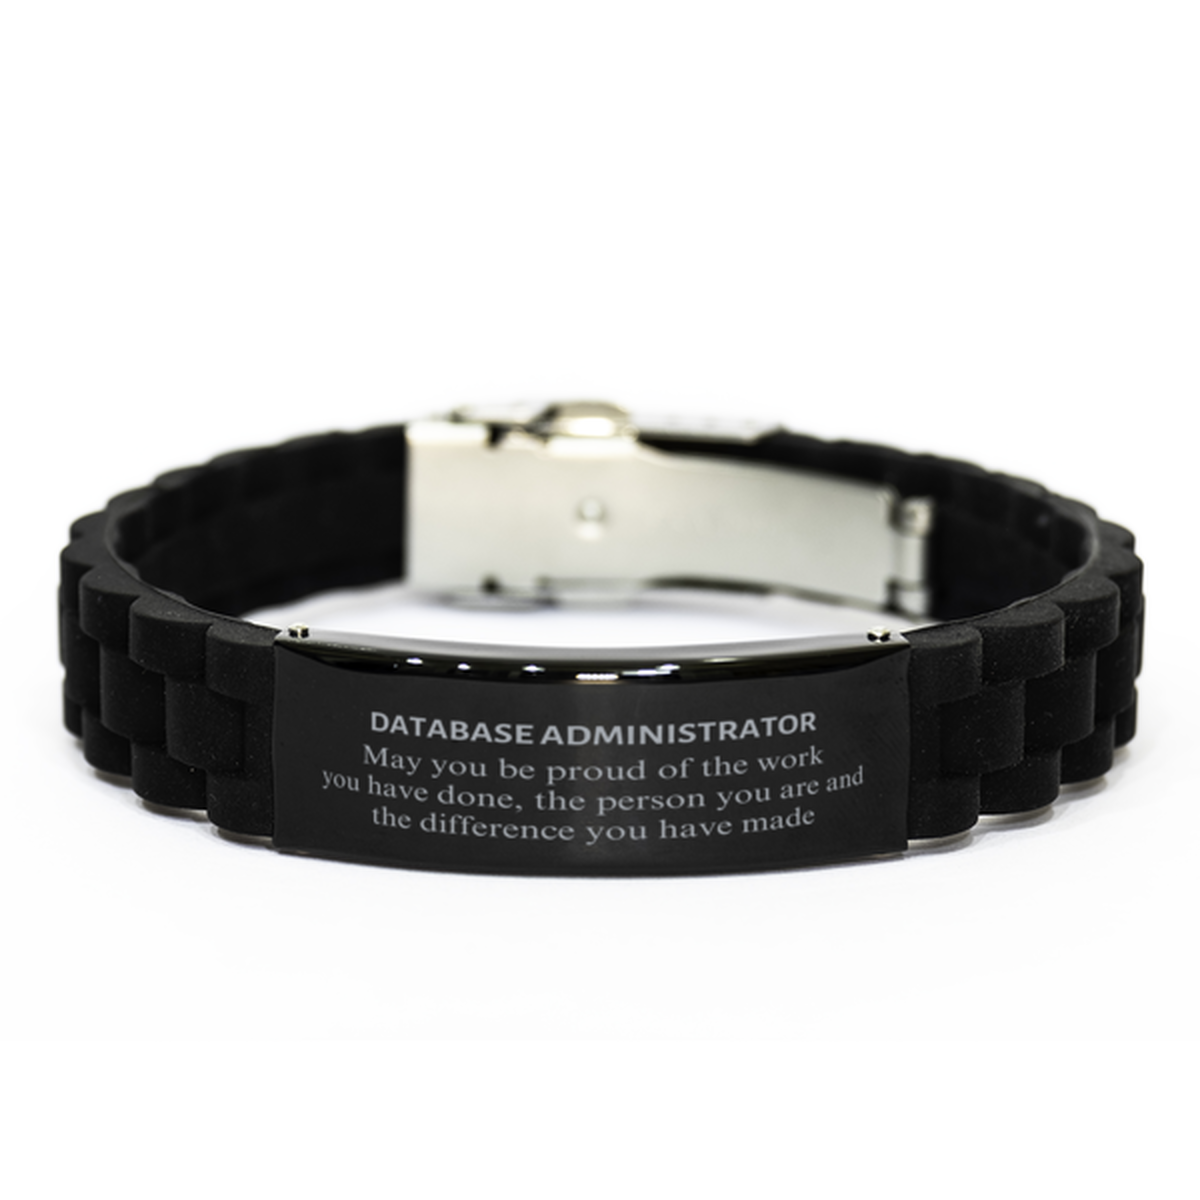 Database Administrator May you be proud of the work you have done, Retirement Database Administrator Black Glidelock Clasp Bracelet for Colleague Appreciation Gifts Amazing for Database Administrator